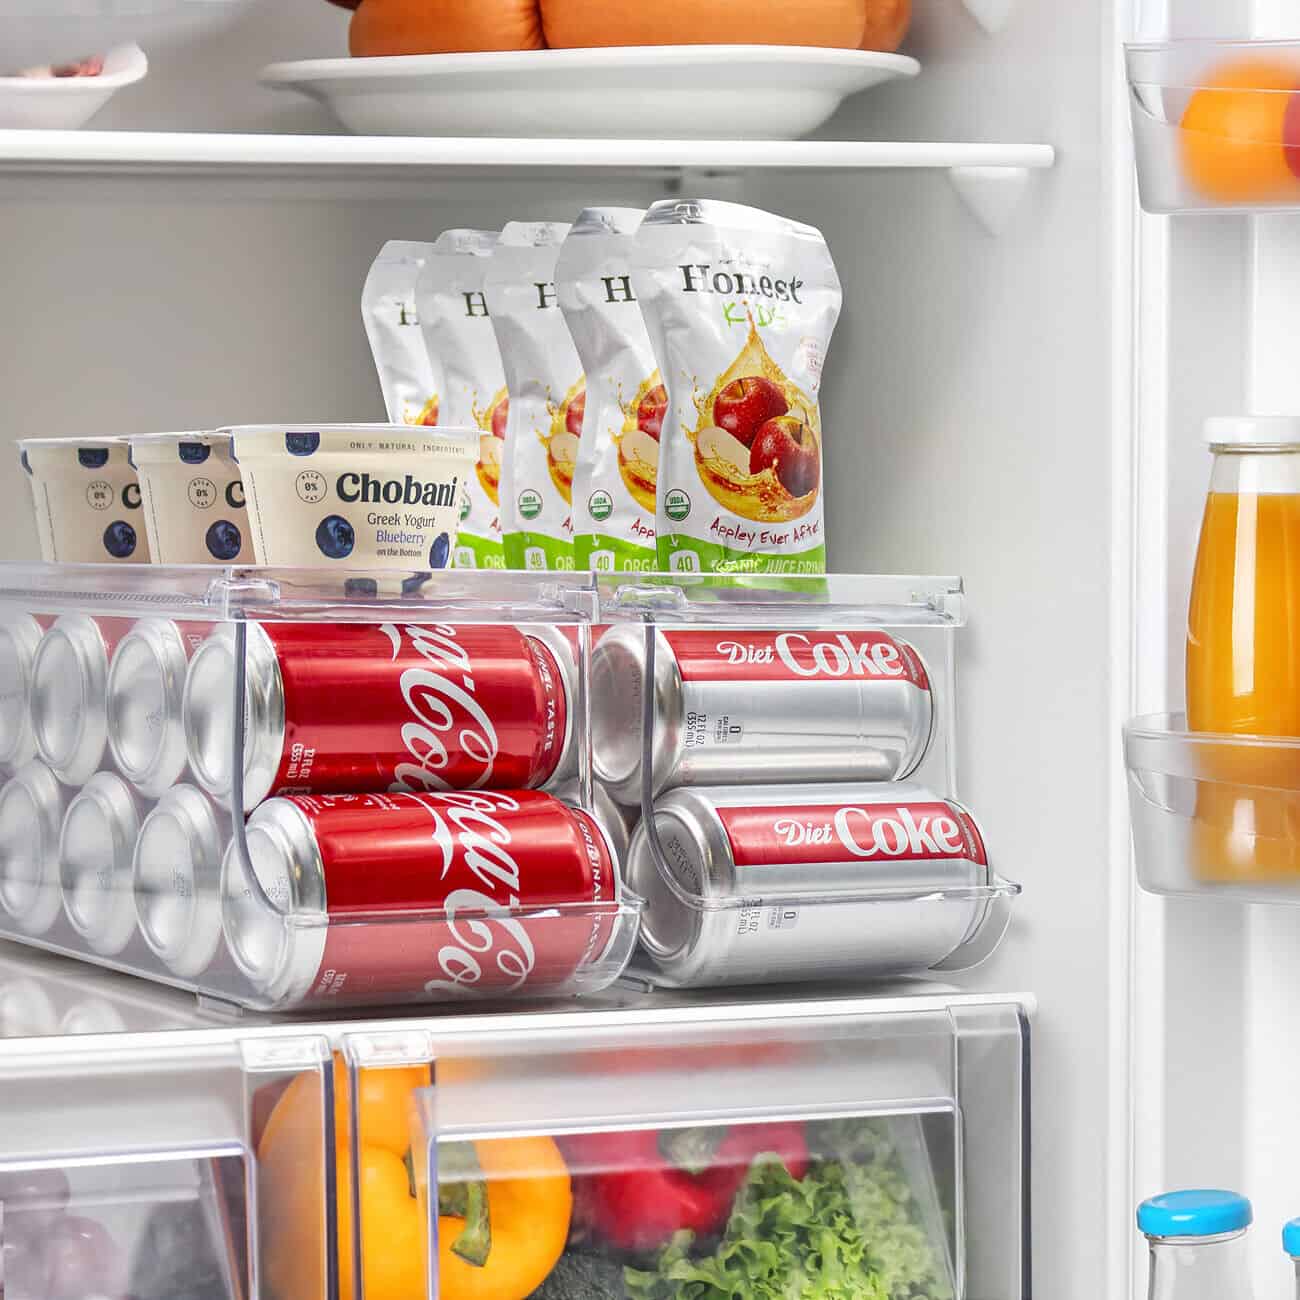 A refrigerator with a lot of food and drinks in it.